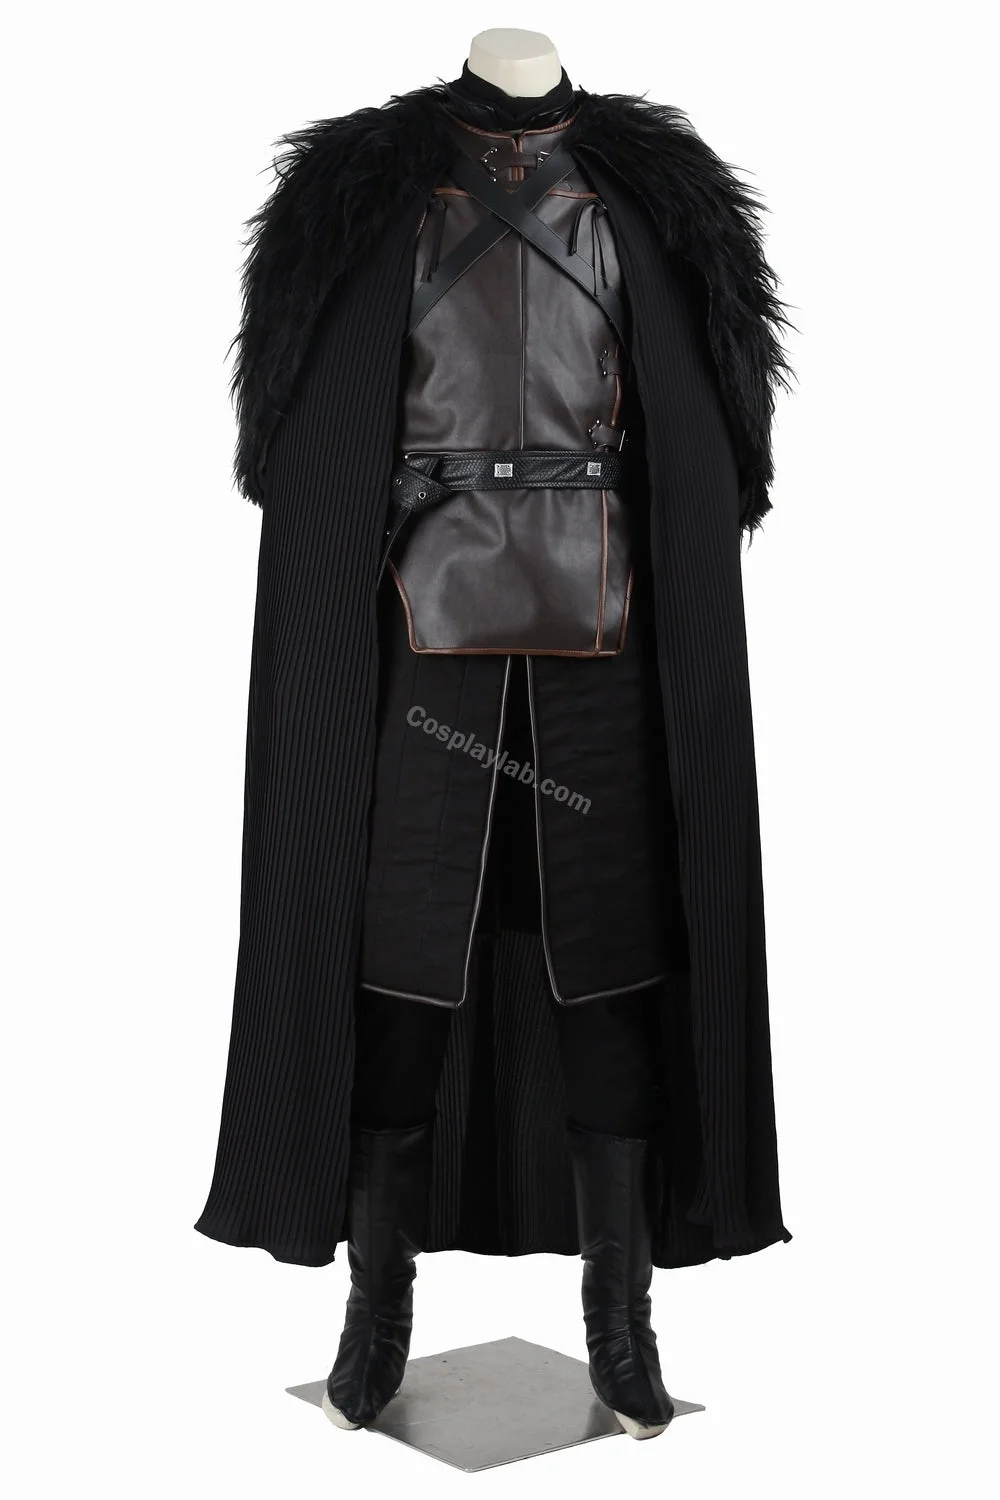 Jon Snow Night's Watch Commander Suit Cosplay Costume Game of Thrones By CosplayLab